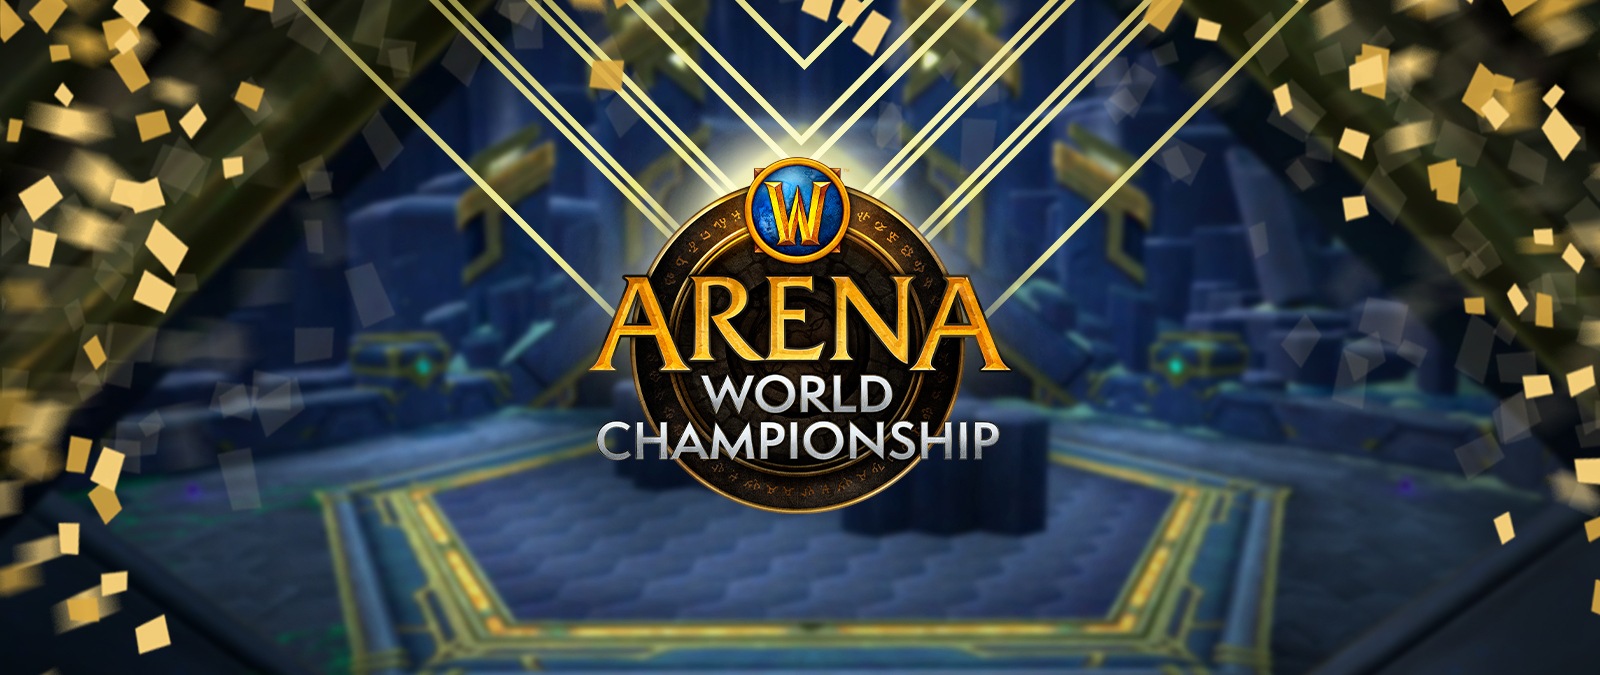 Arena World Championship Circuit Viewer’s Guide 